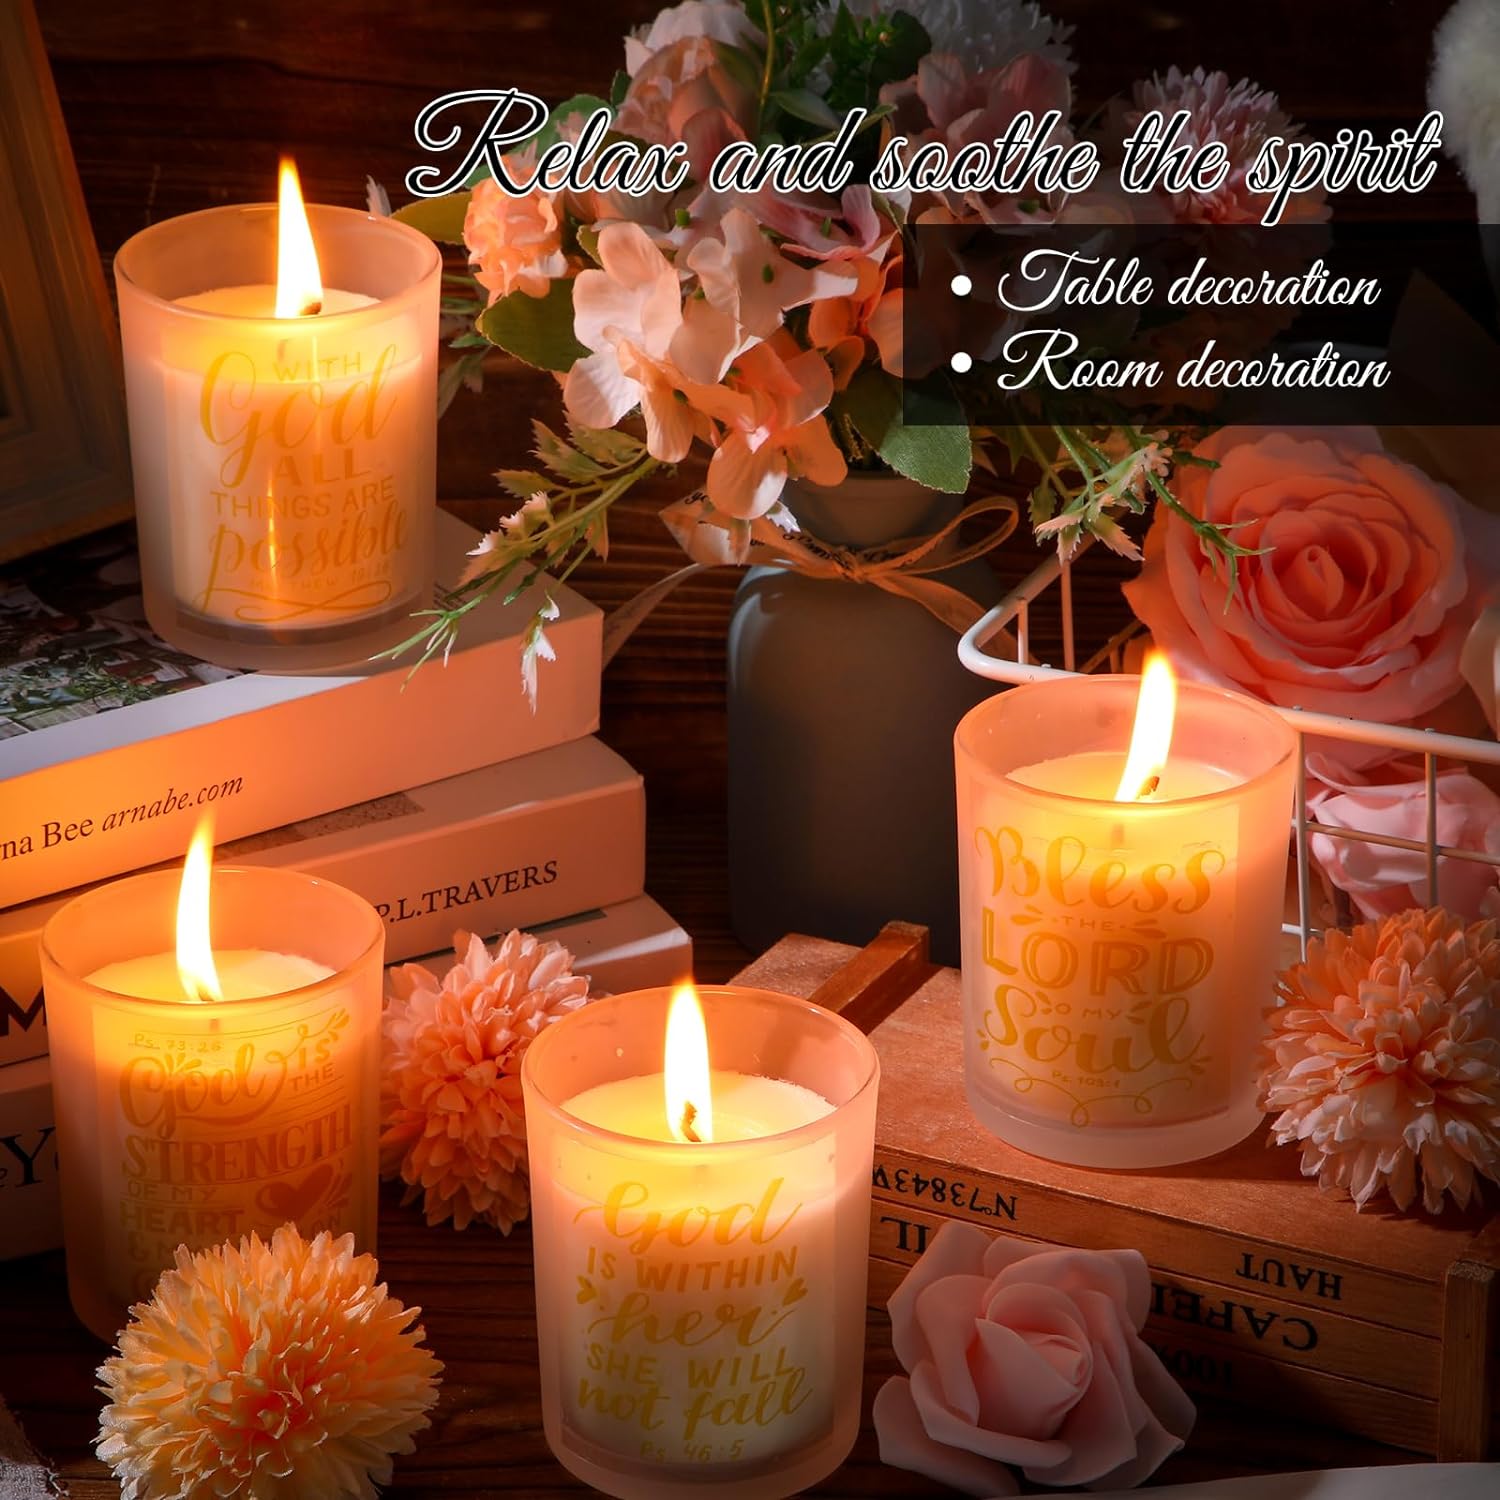 Christian Inspired Scented Candle Set